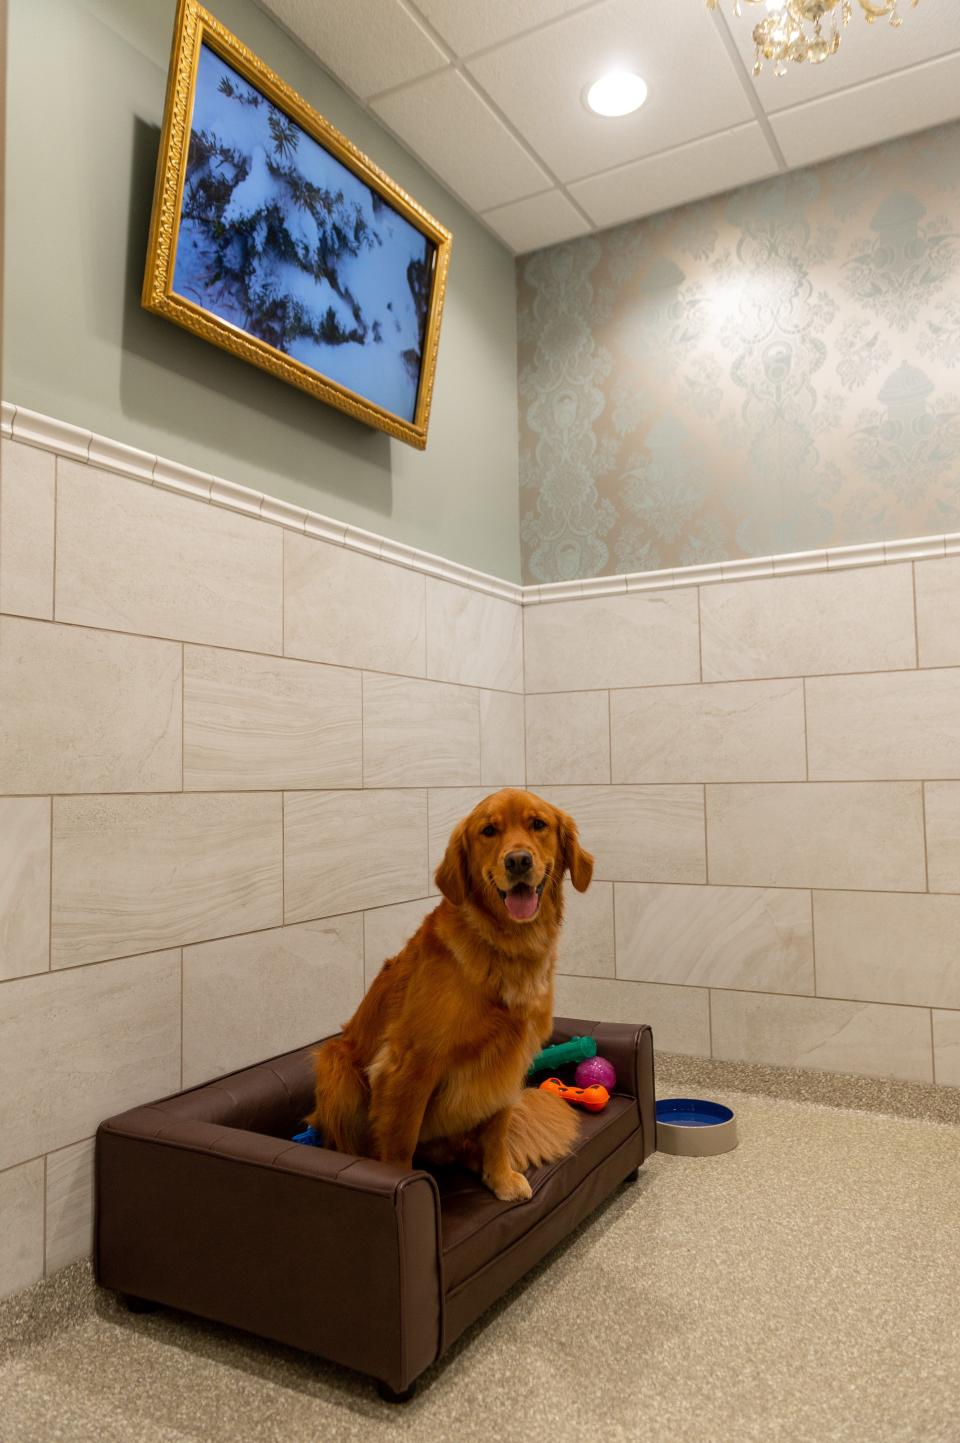 An award-winning dog hotel and daycare chain is opening its first Wisconsin location in Brookfield.